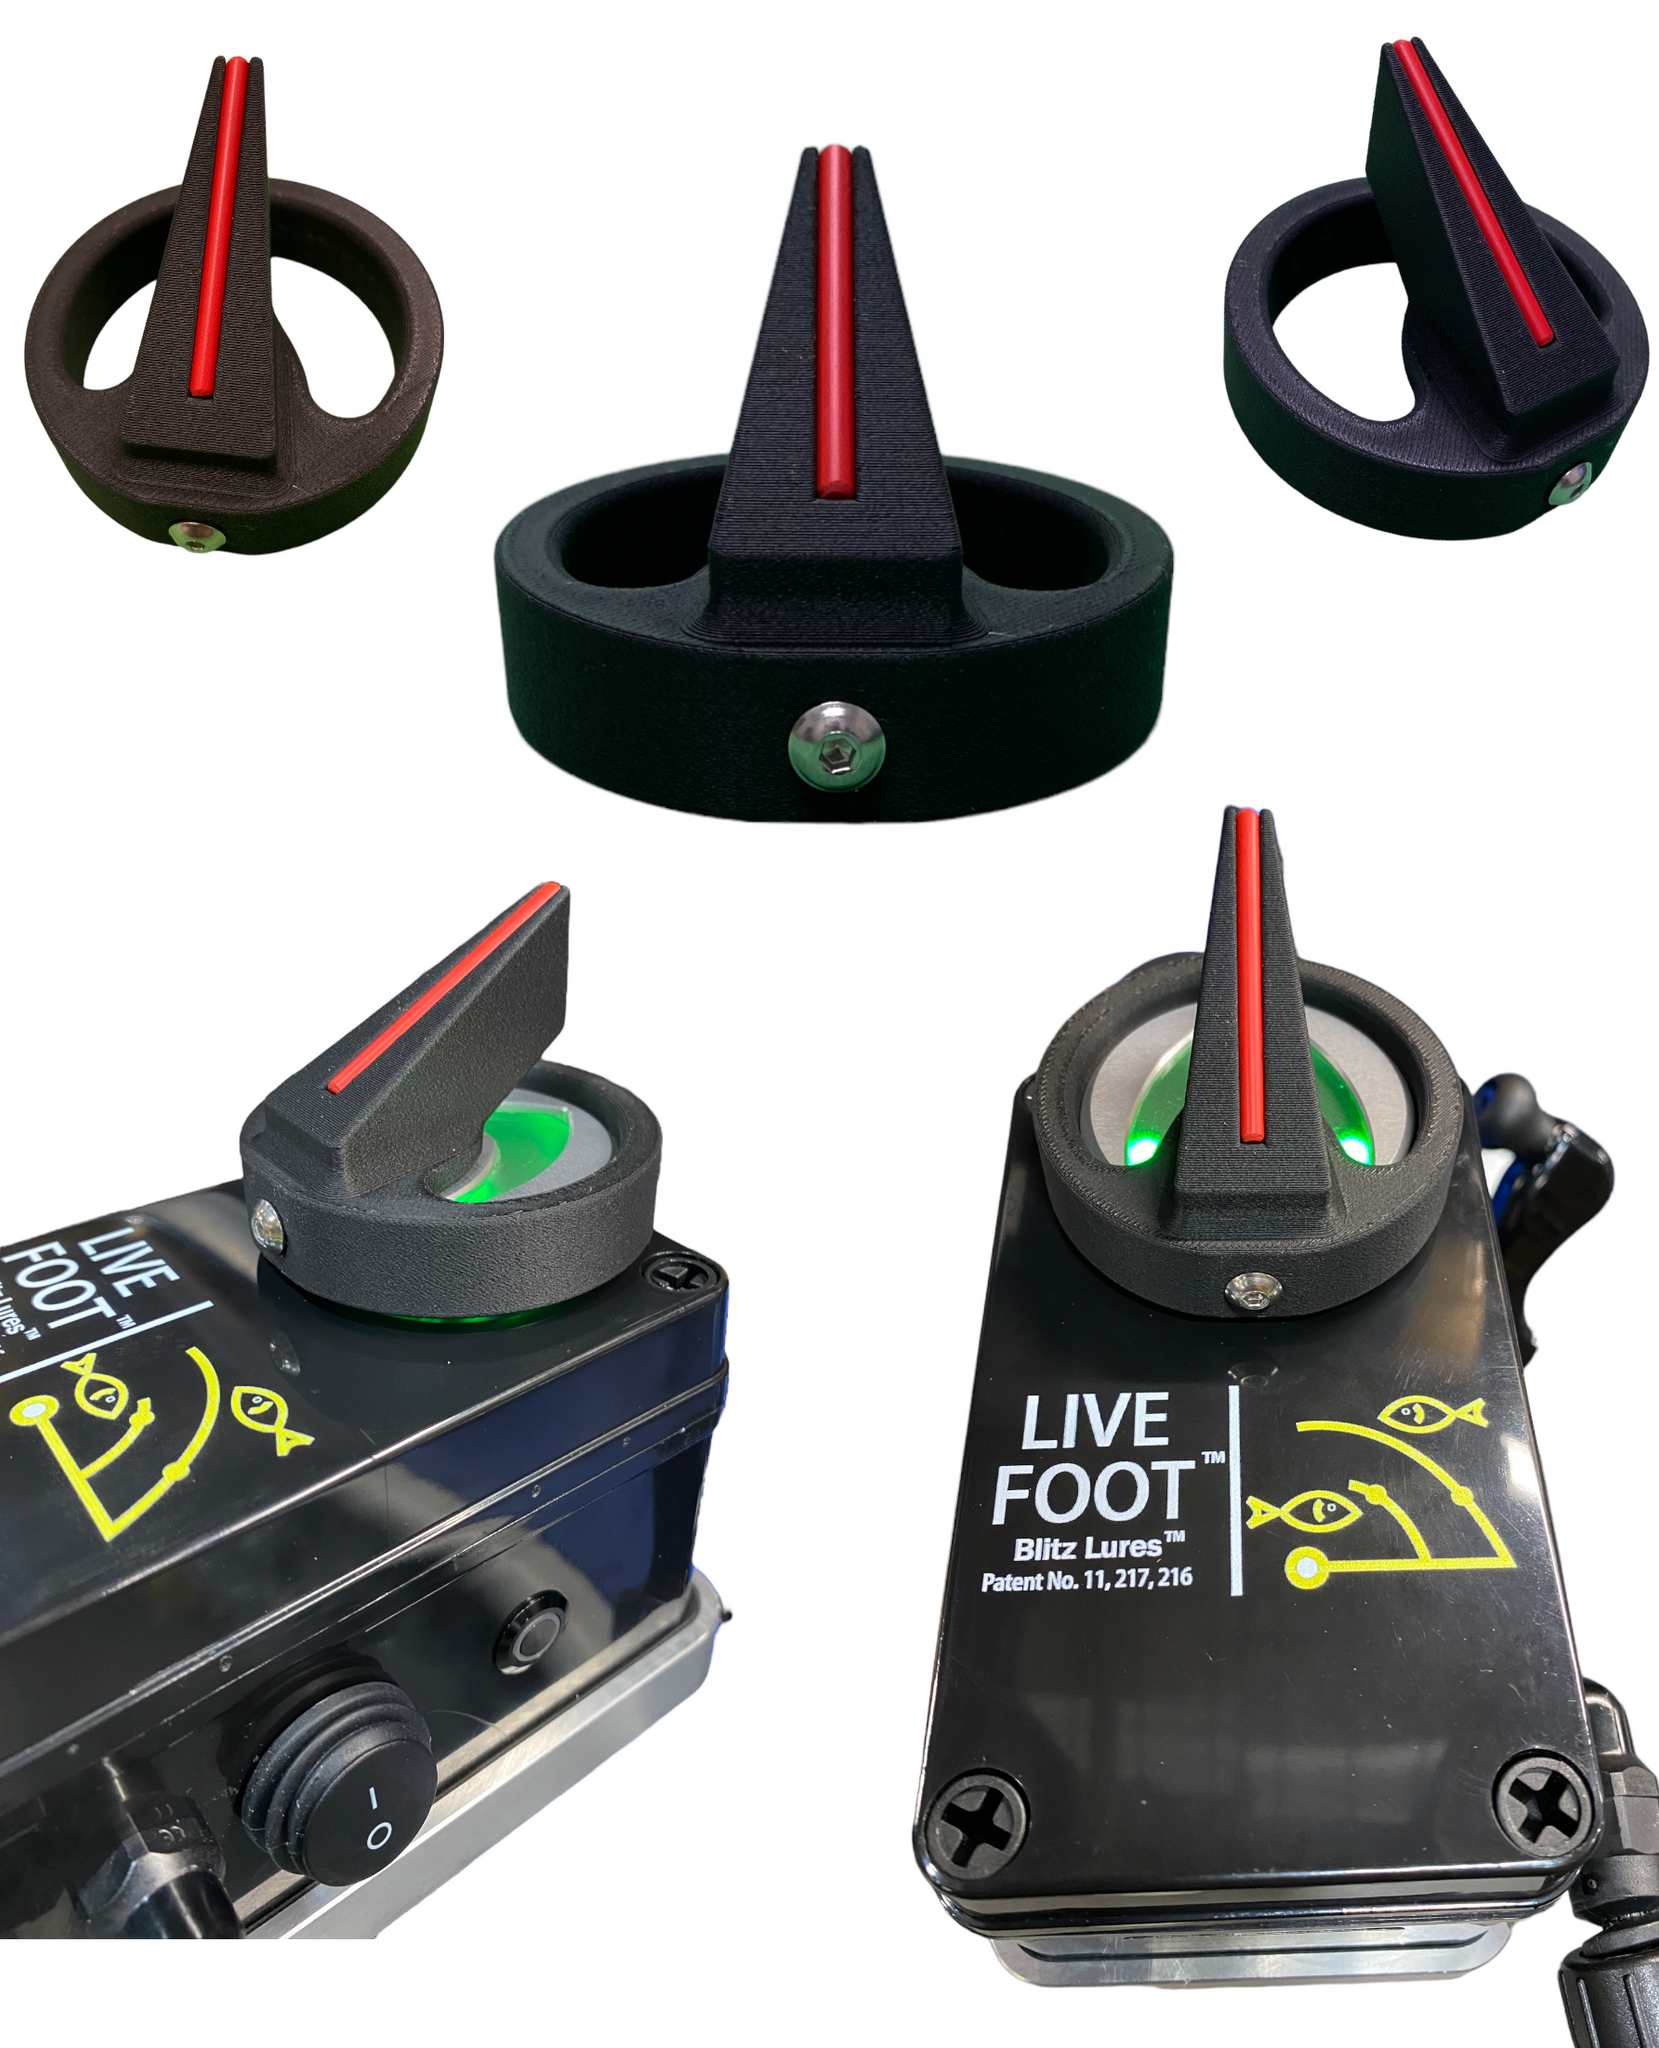 Raised Directional Indicator for the Blitz Lures Live Foot